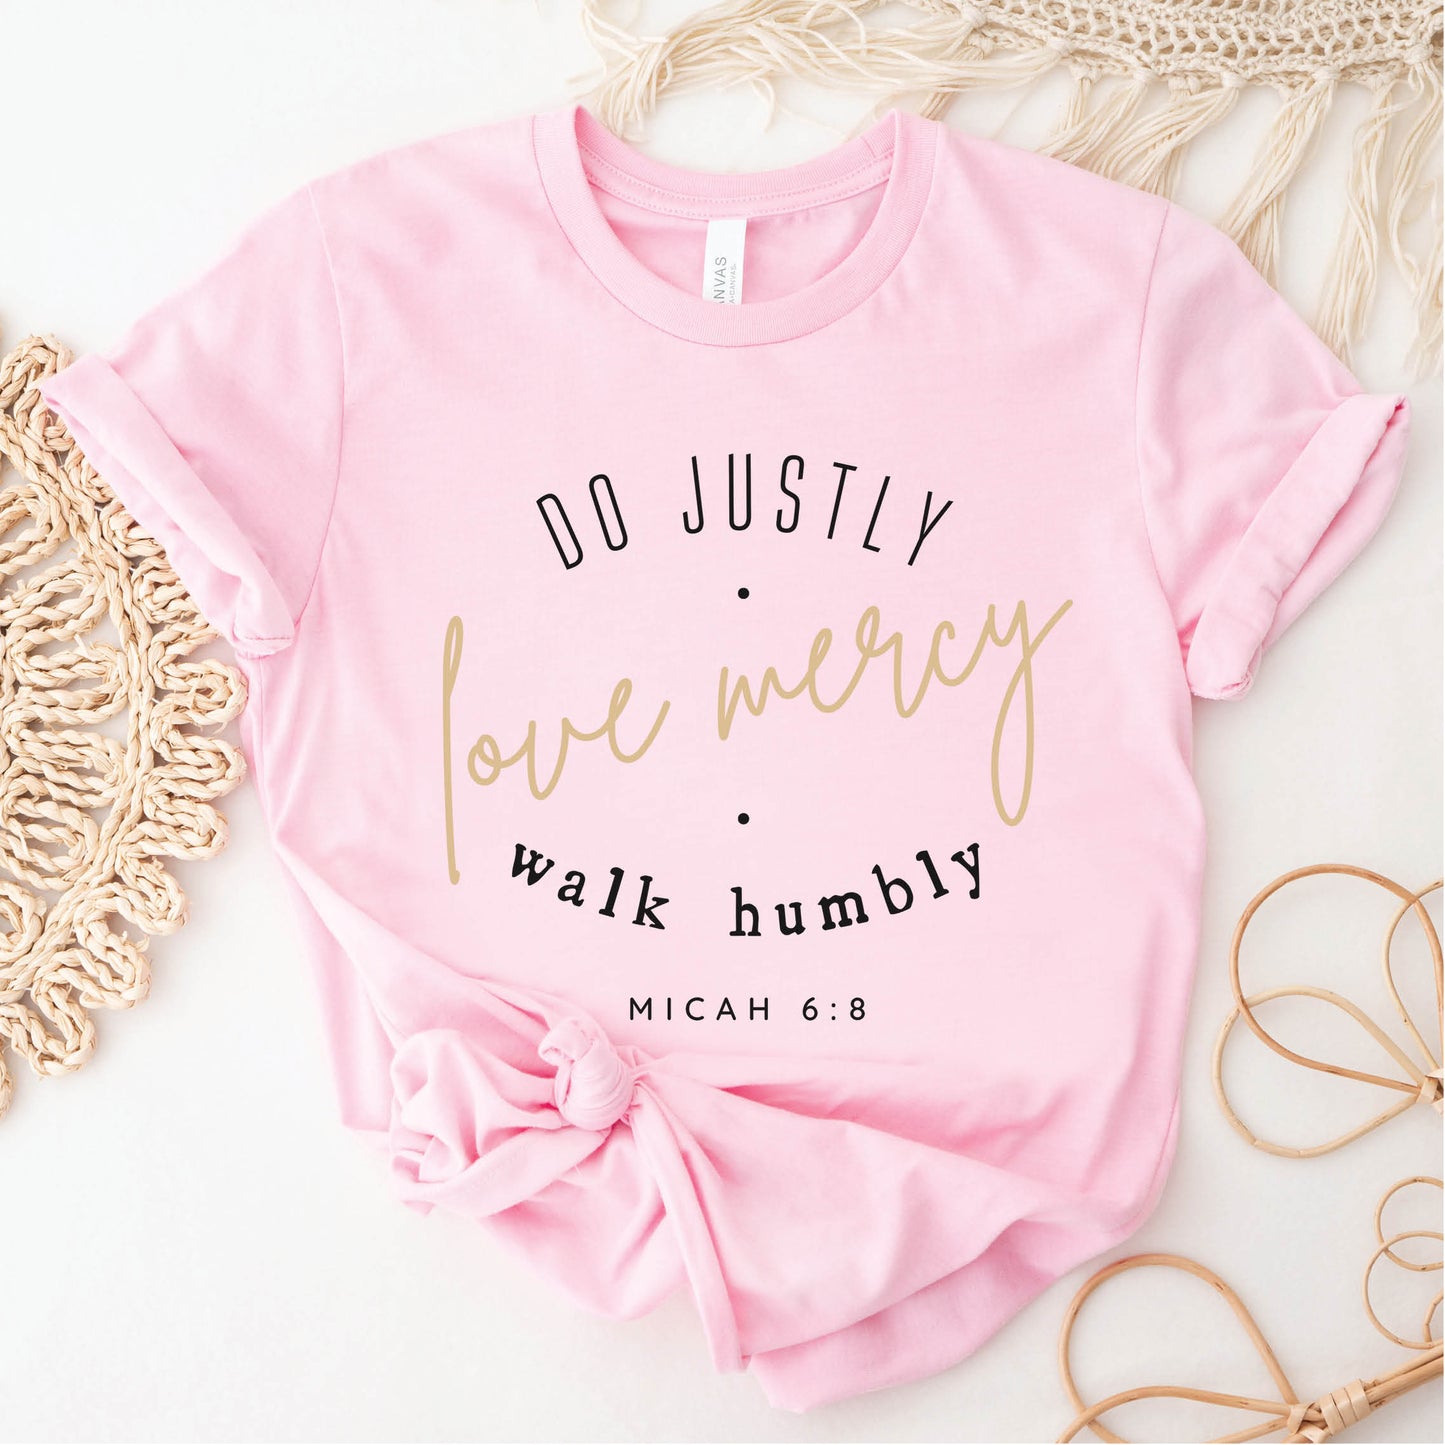 Pink Christian aesthetic faith-based unisex t-shirt for women with Micah 6:8 bible verse scripture printed that says, Do Justly Love Mercy walk humbly, in gold and black, unique gift for her